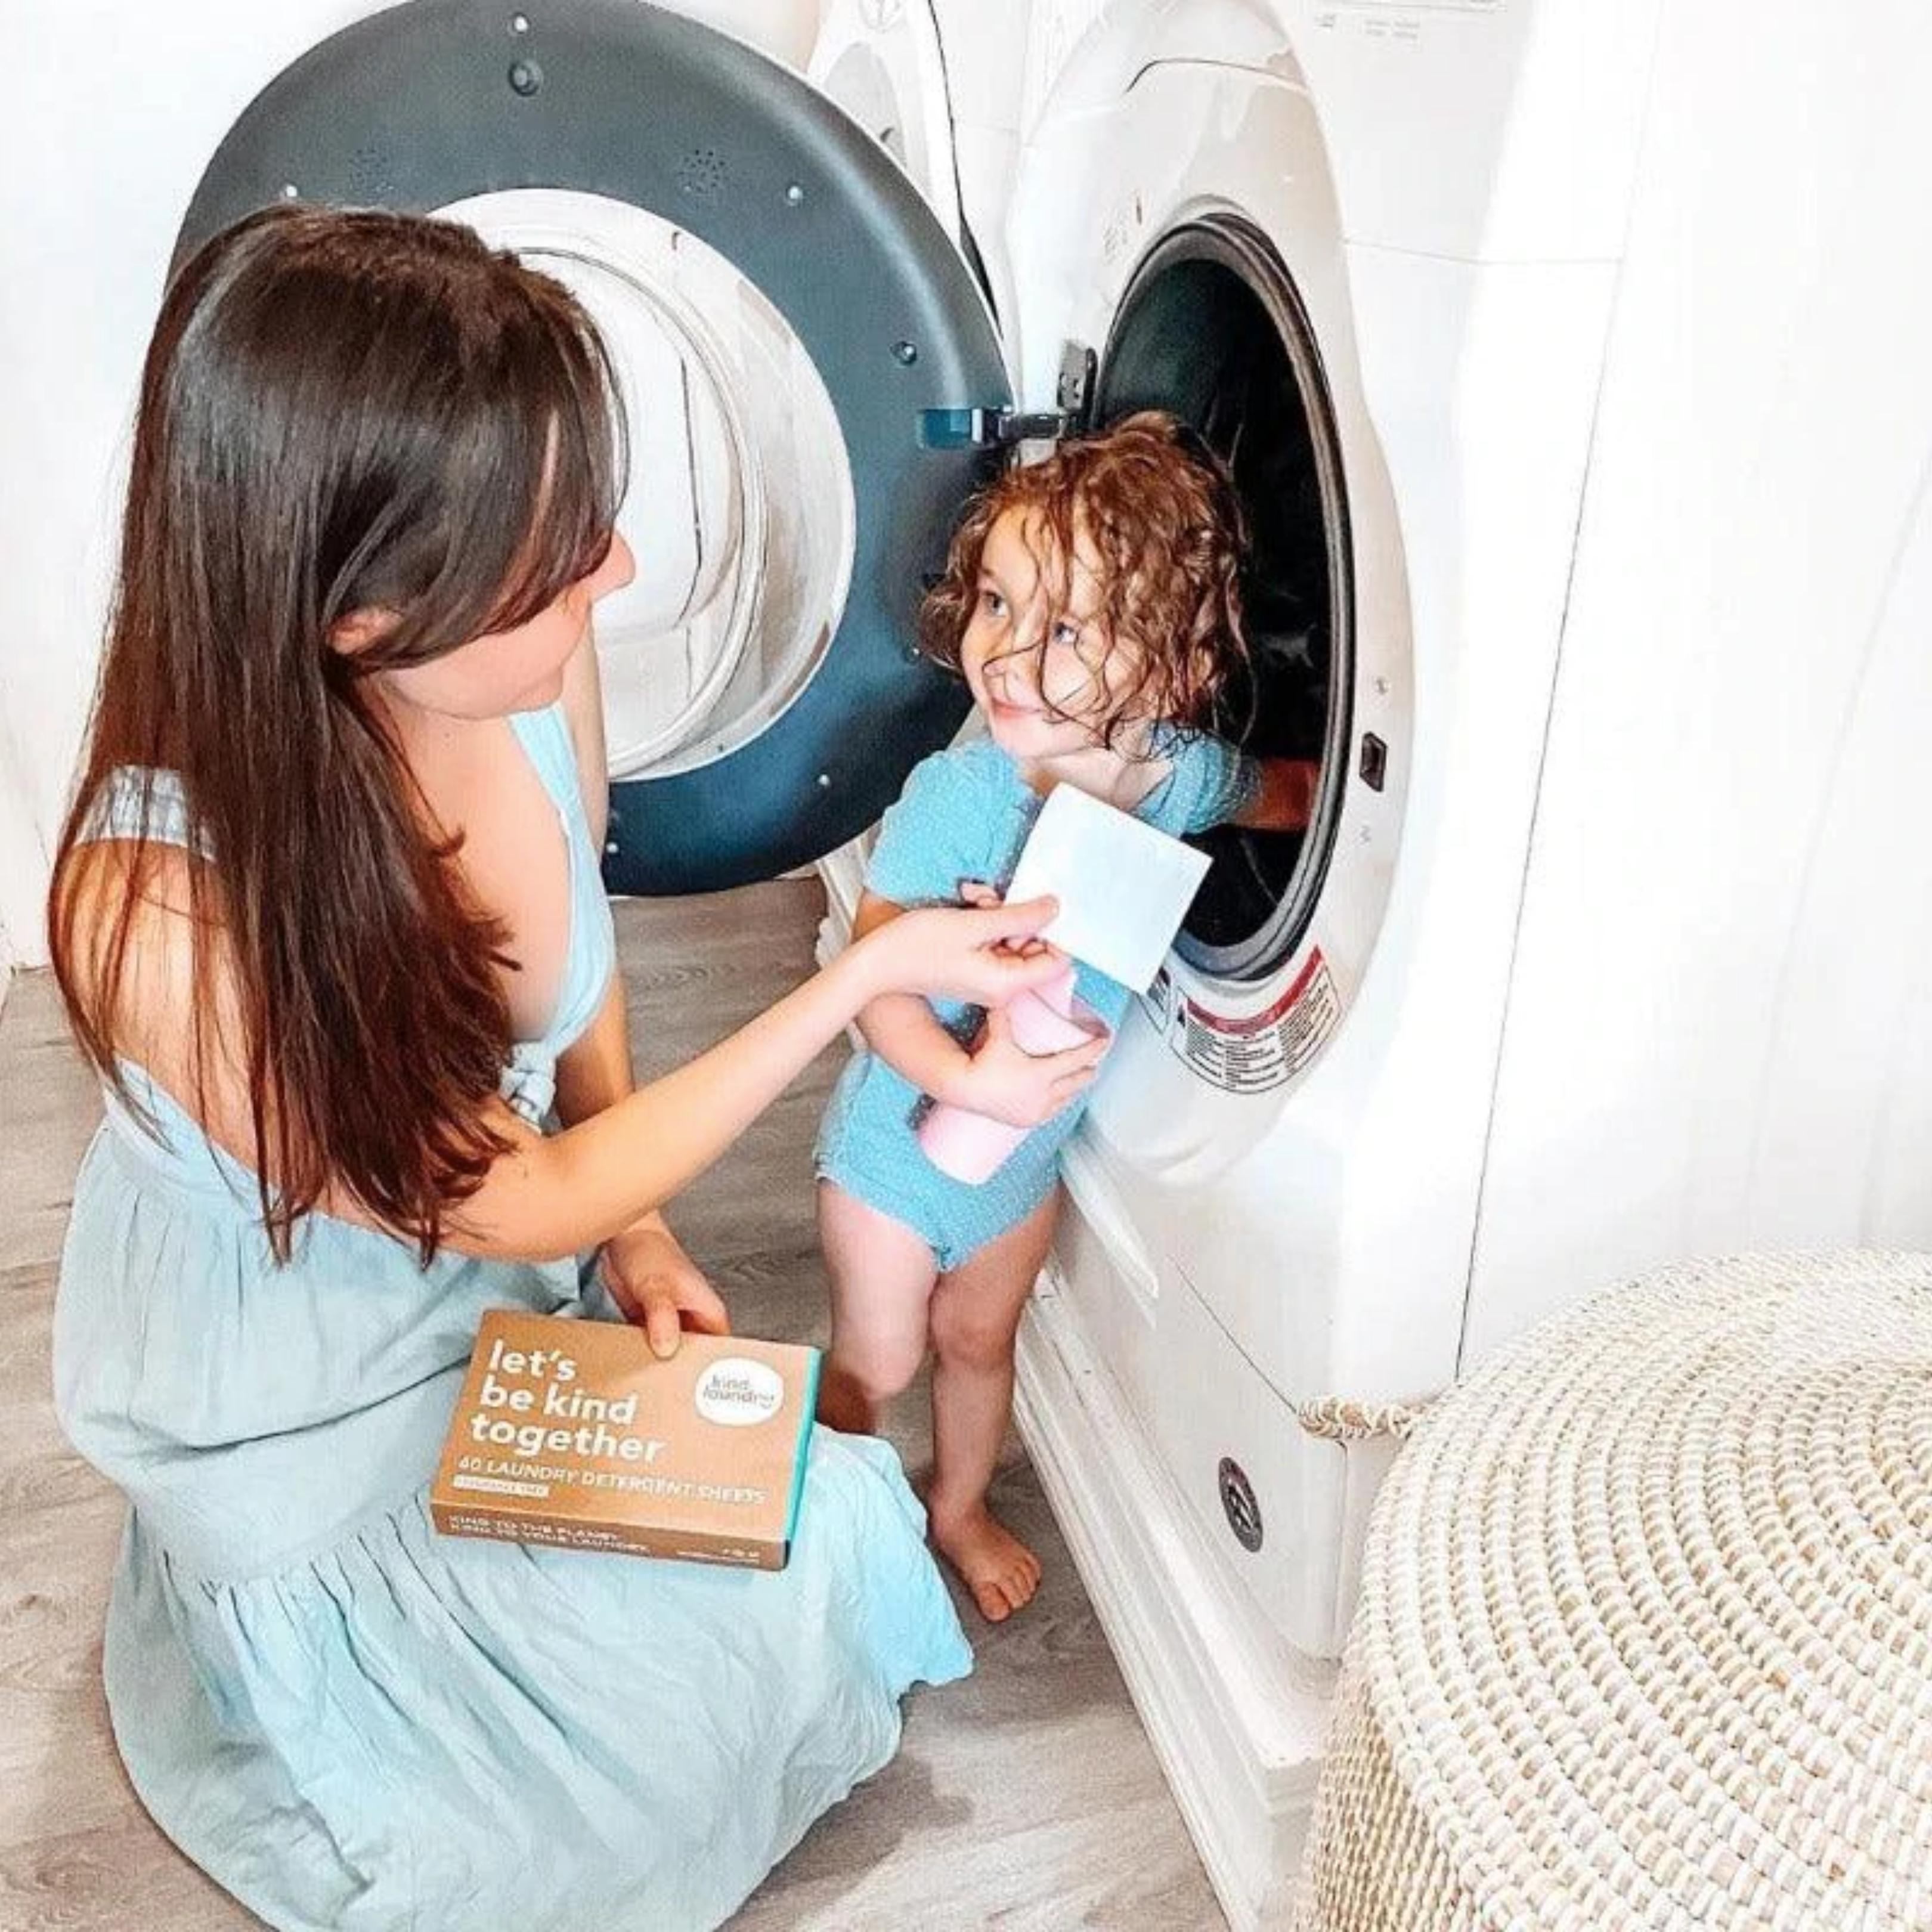 zero waste laundry detergent sheets - scent free (60 sheets) - local - letsbelocal.ca